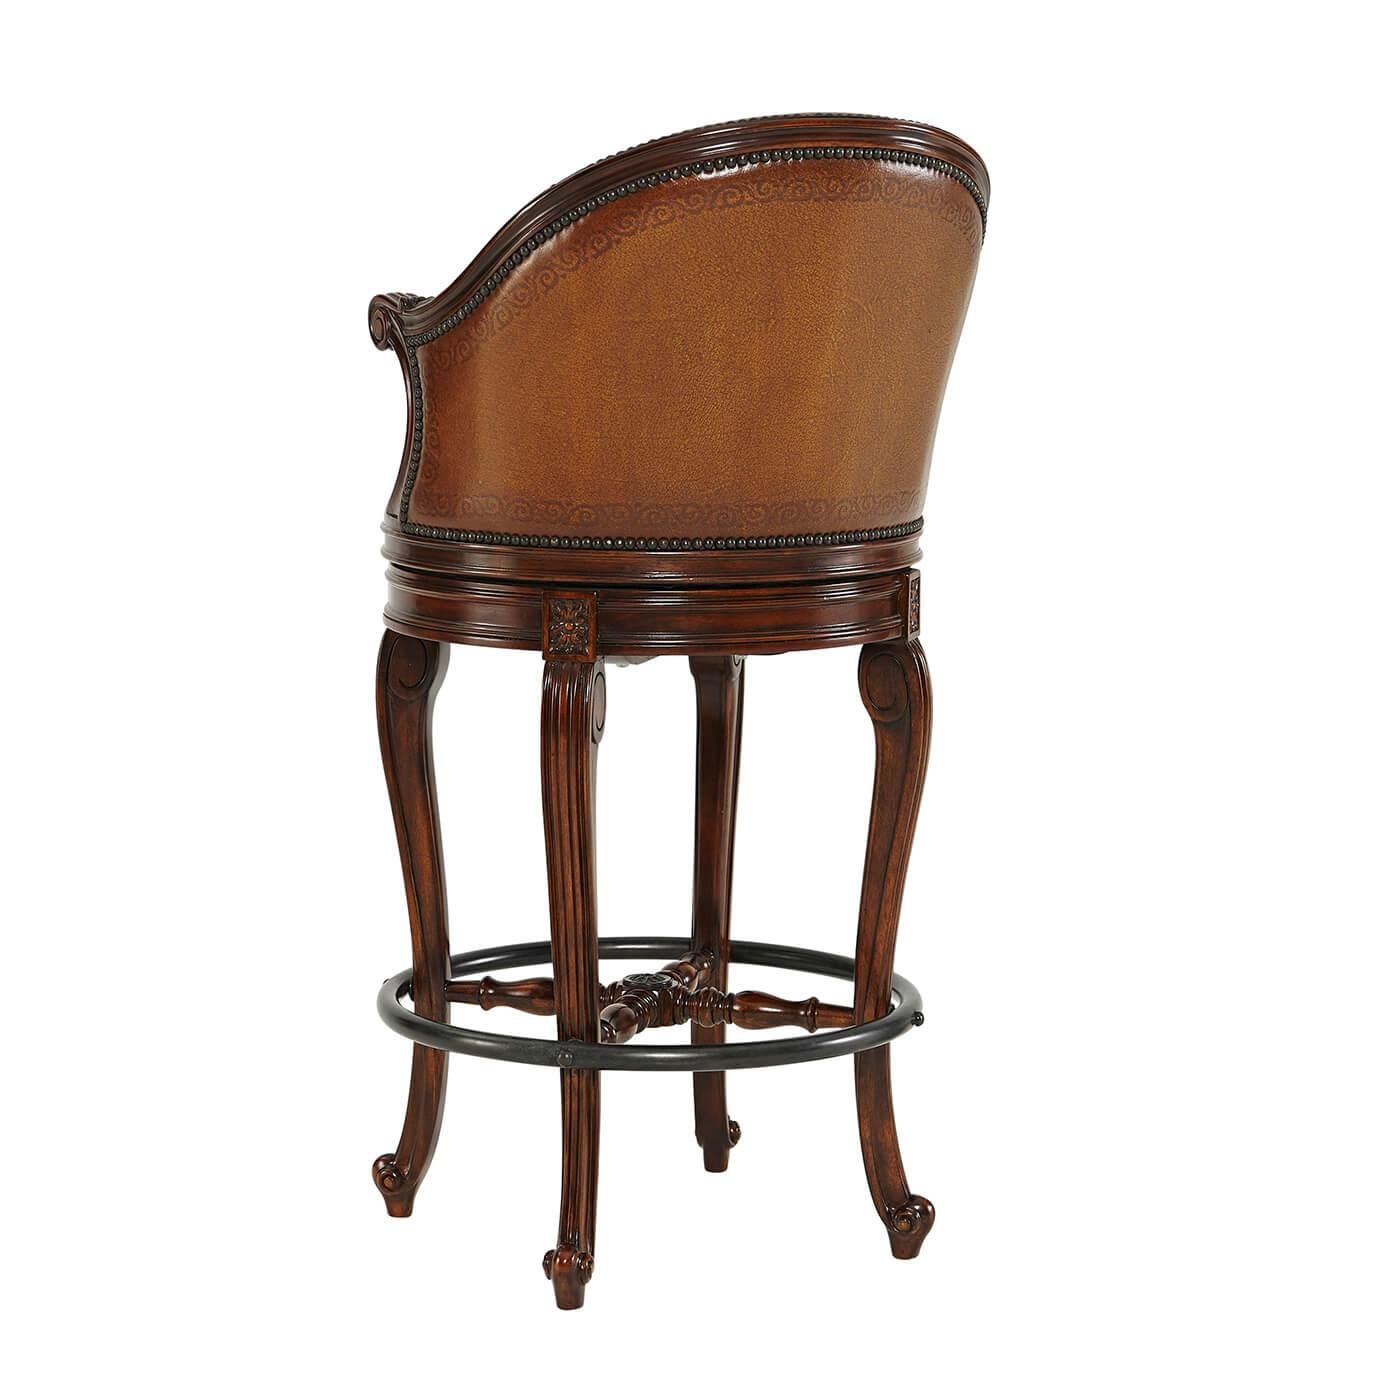 A French Louis XV style hand carved scoop back swivel bar stool, the padded scoop back and upholstered tooled leather seat and back, with scroll arms and legs and a verdigris brass footrest. 

Dimensions: 22